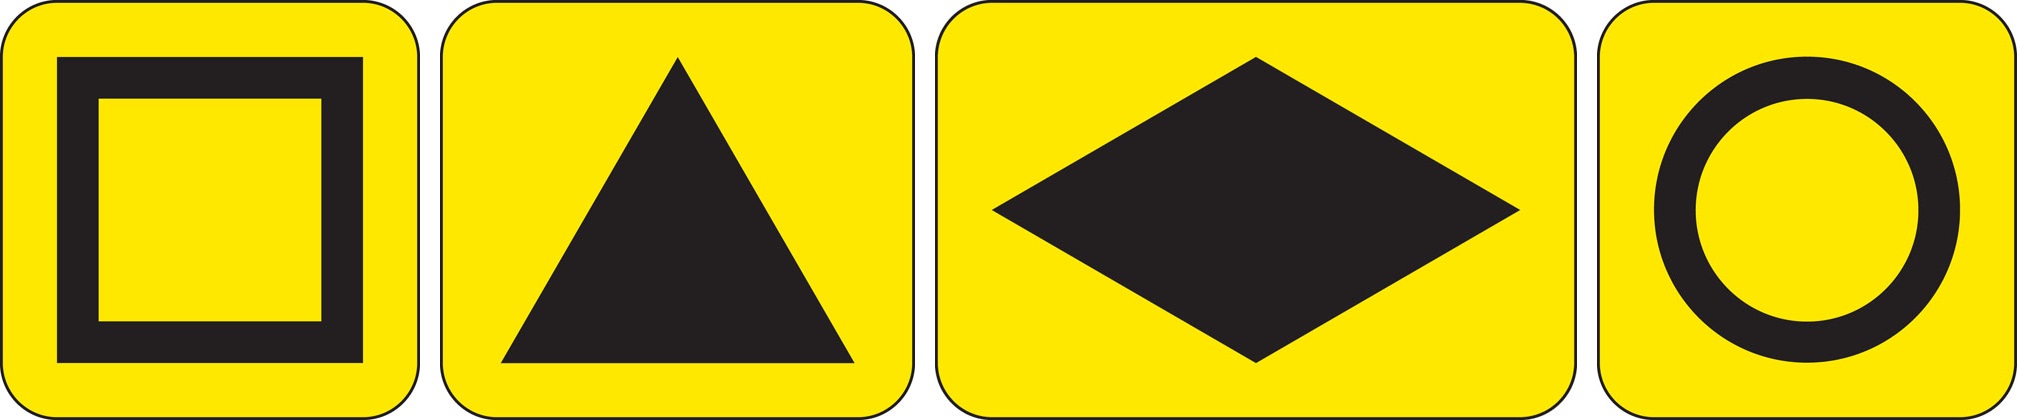 Traffic Sign - Emergency diversion route symbols